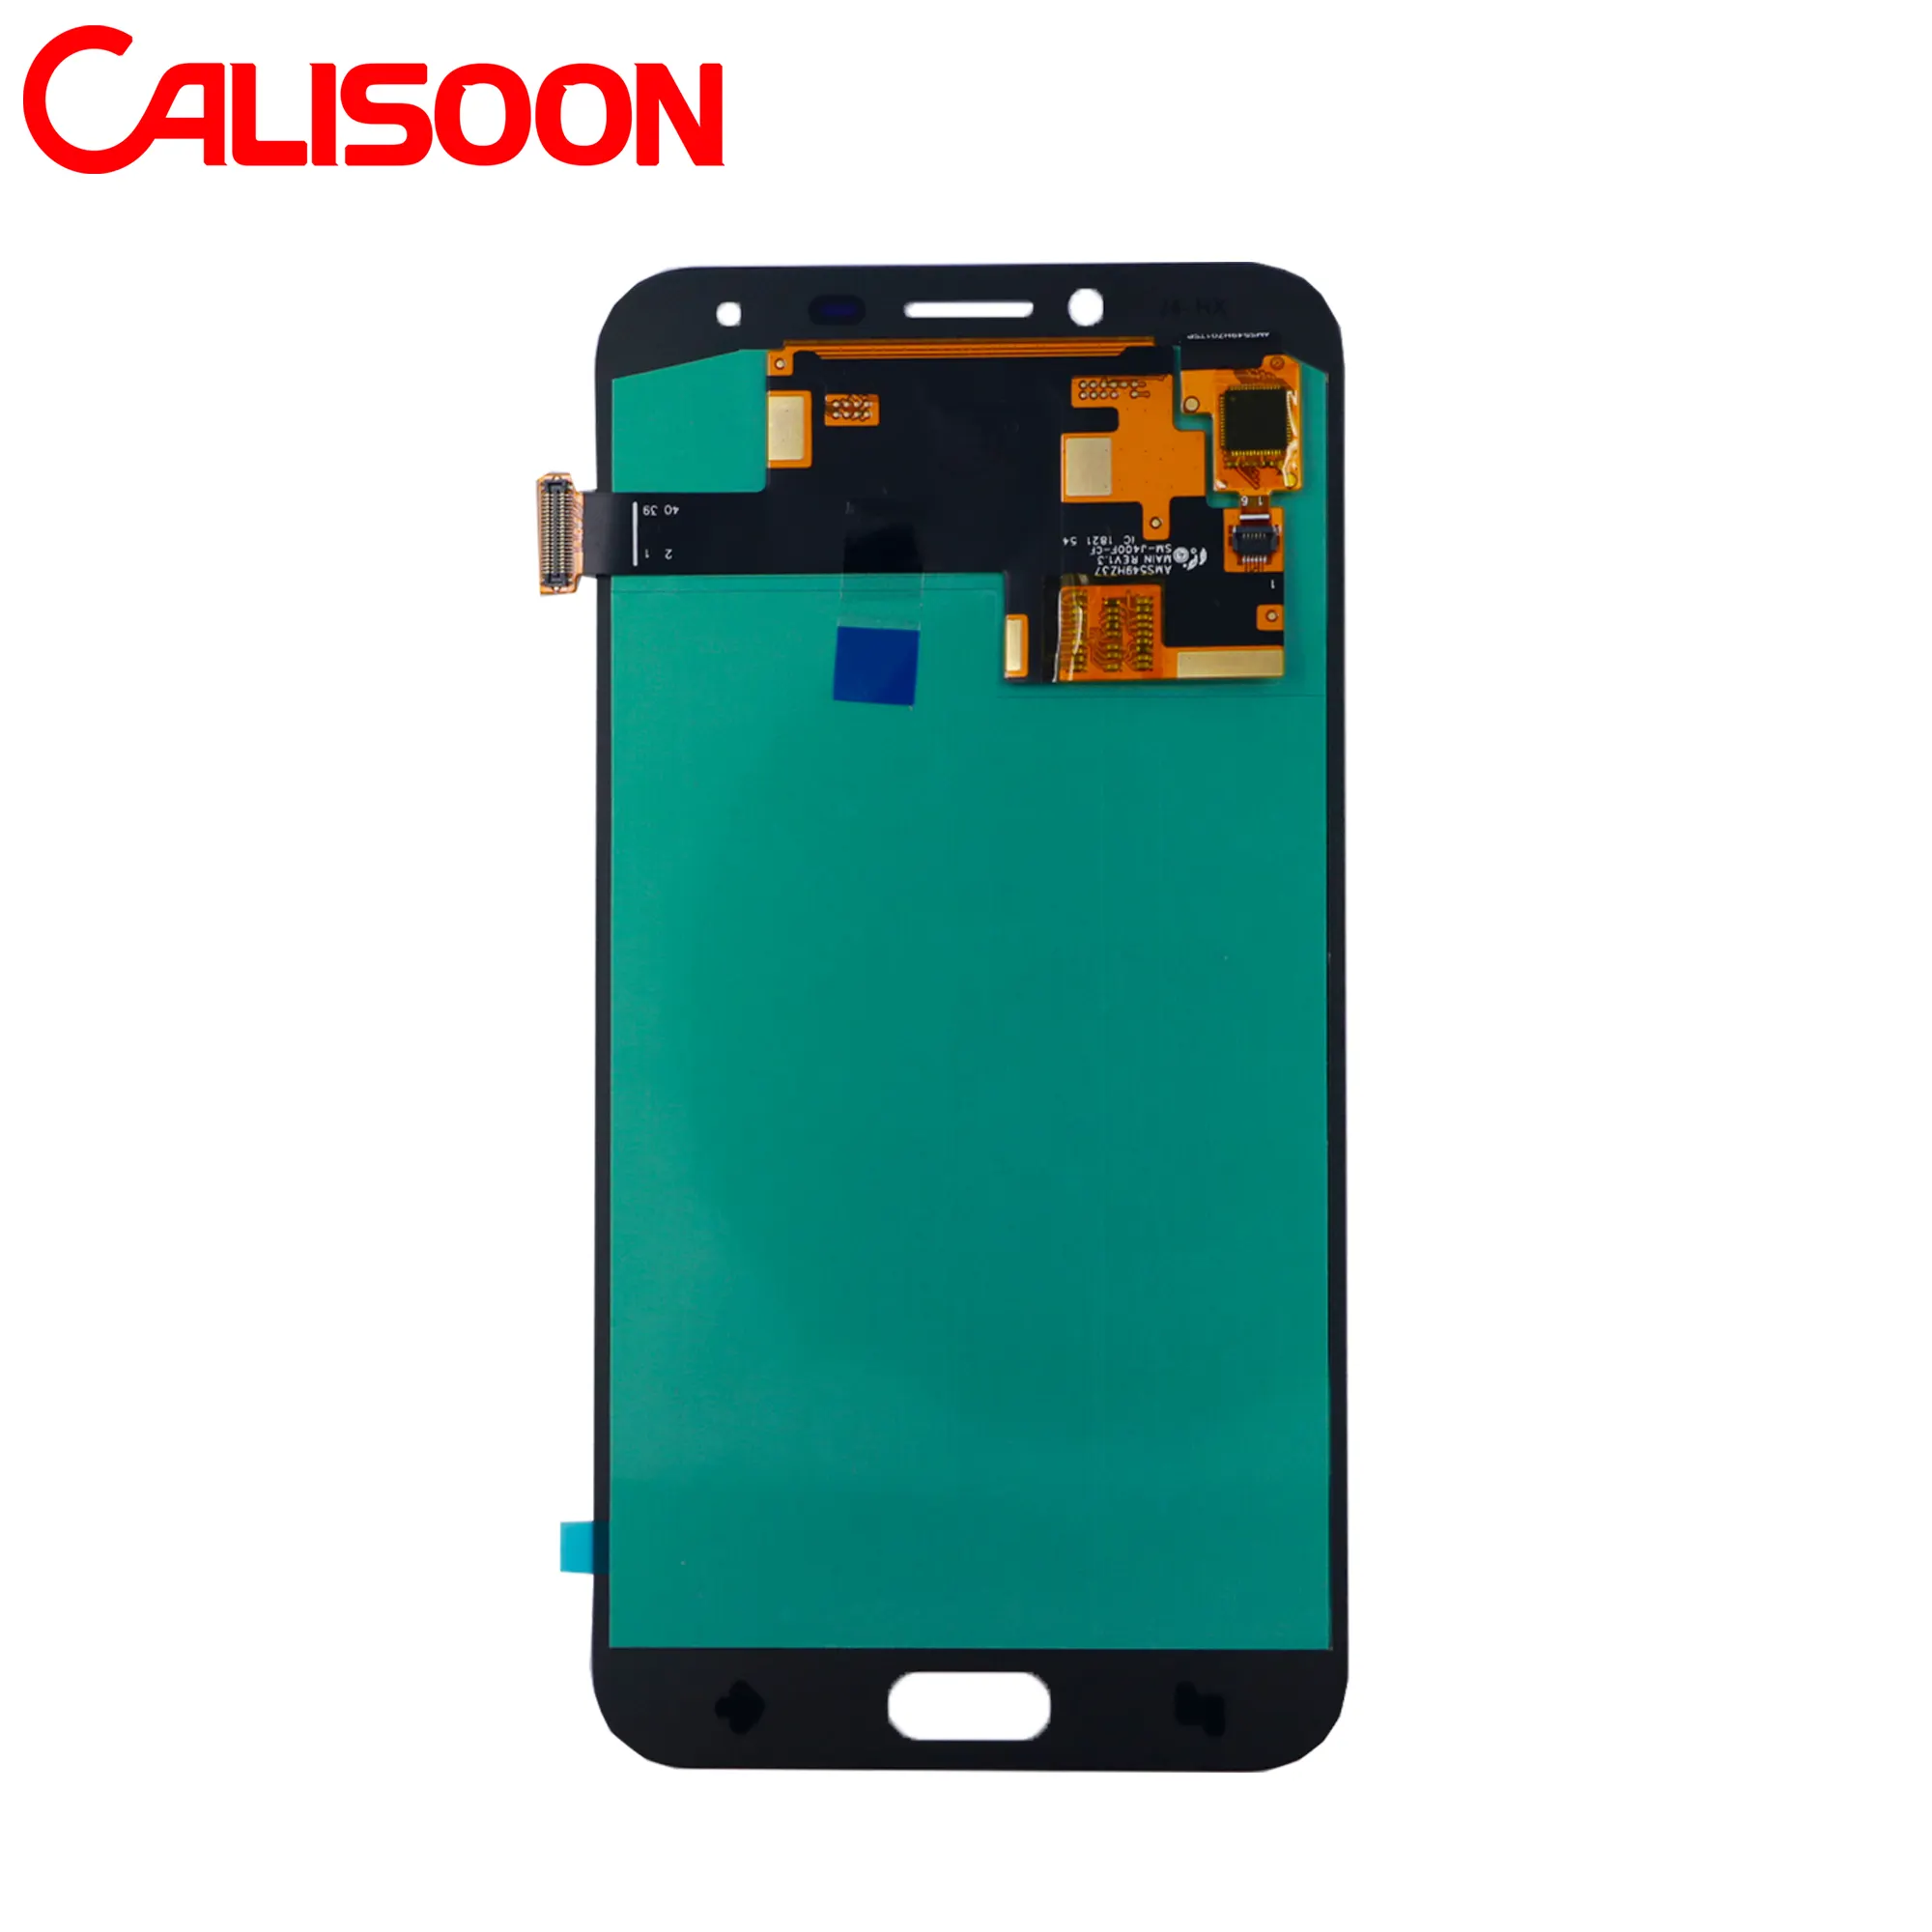 lcd touch screen for Samsung Galaxy j4 Display replacement